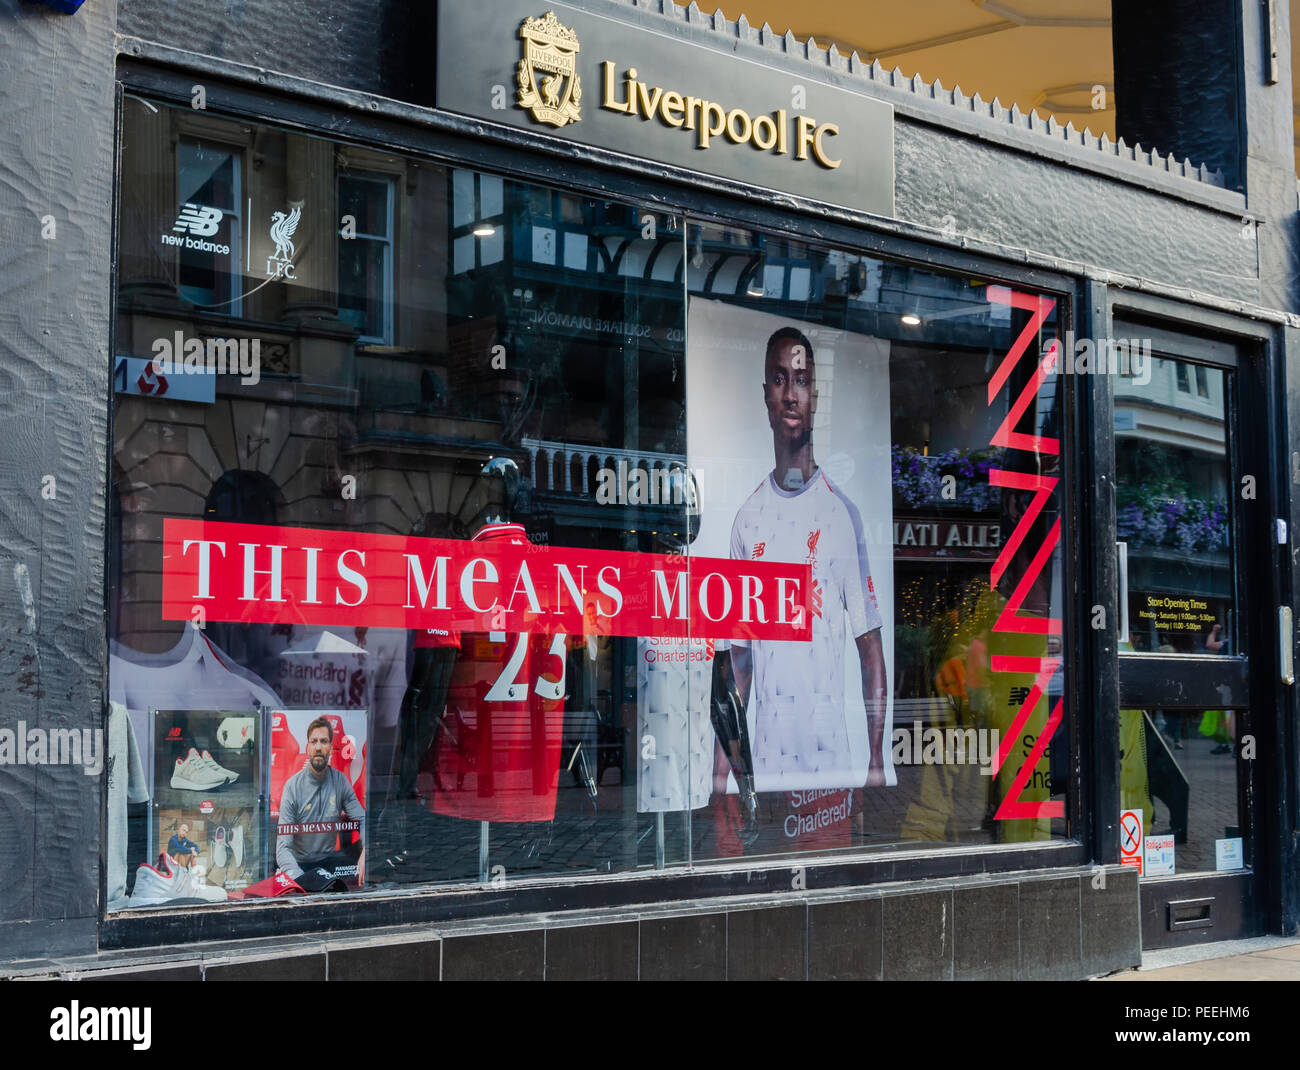 Chester, UK: Aug 6, 2018: Liverpool Football Club shop premises in Chester city centre. Liverpool FC play in the Premier League which is the top tier  Stock Photo